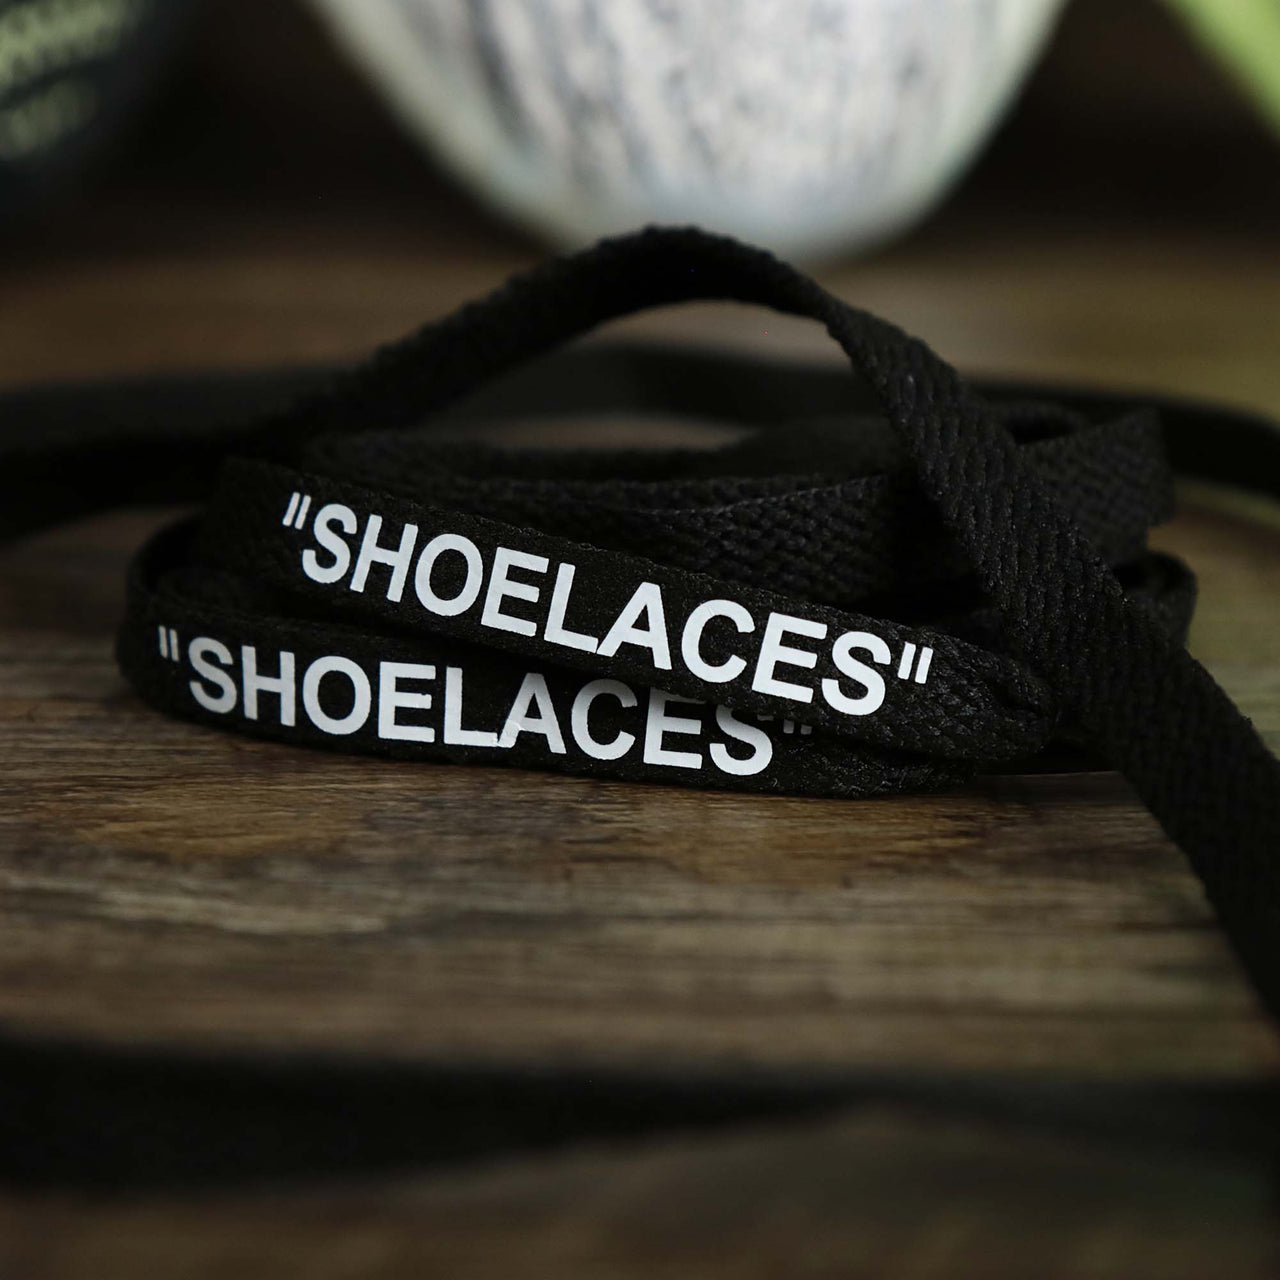 The Flat Black Shoelaces with “Shoelaces” Print | 120cm Capswag